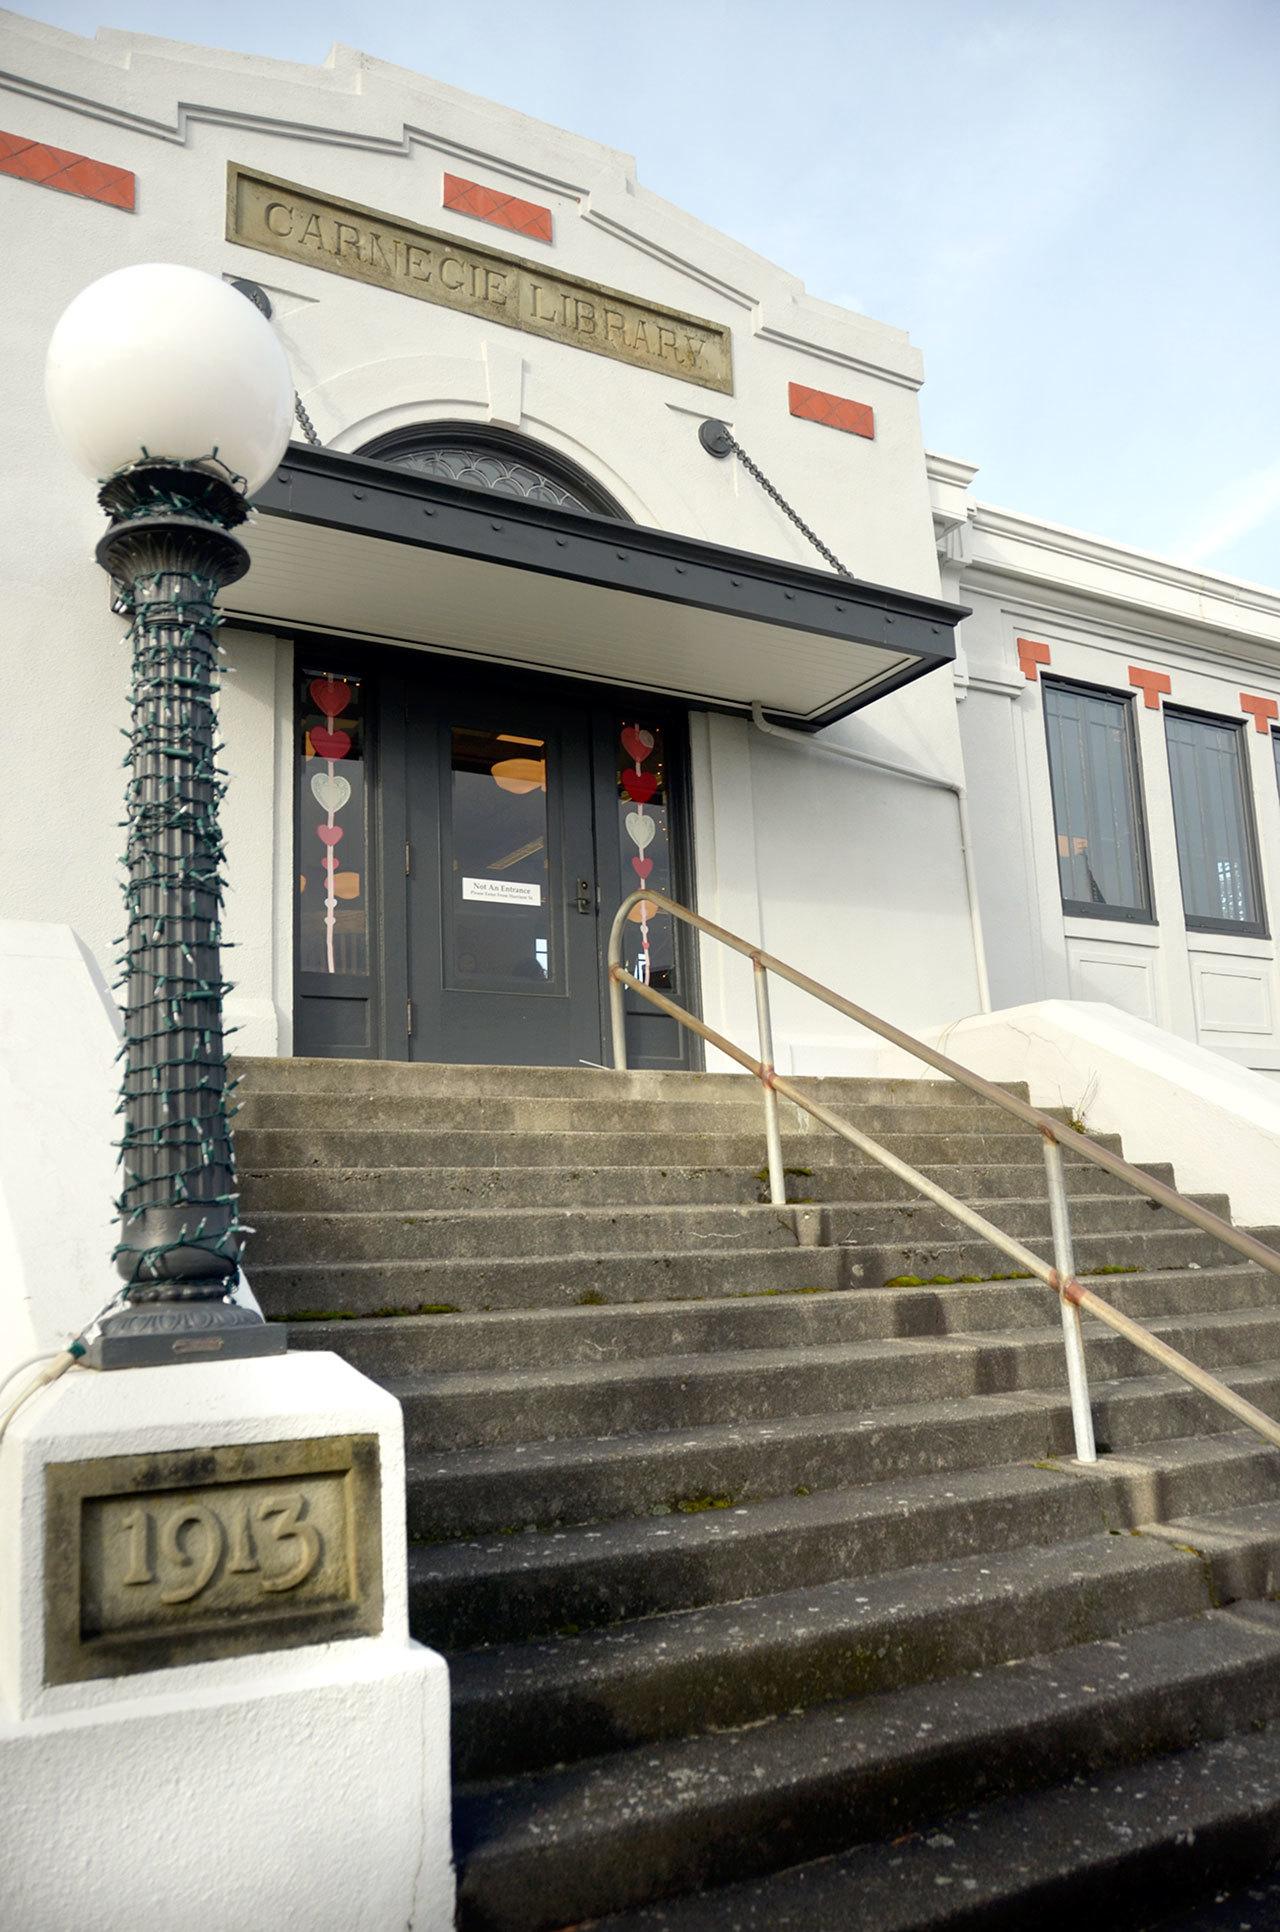 The Port Townsend Library will be getting some major updates to its interior and exterior soon thanks to a City Council decision made during Monday night’s meeting. (Cydney McFarland/Peninsula Daily News)